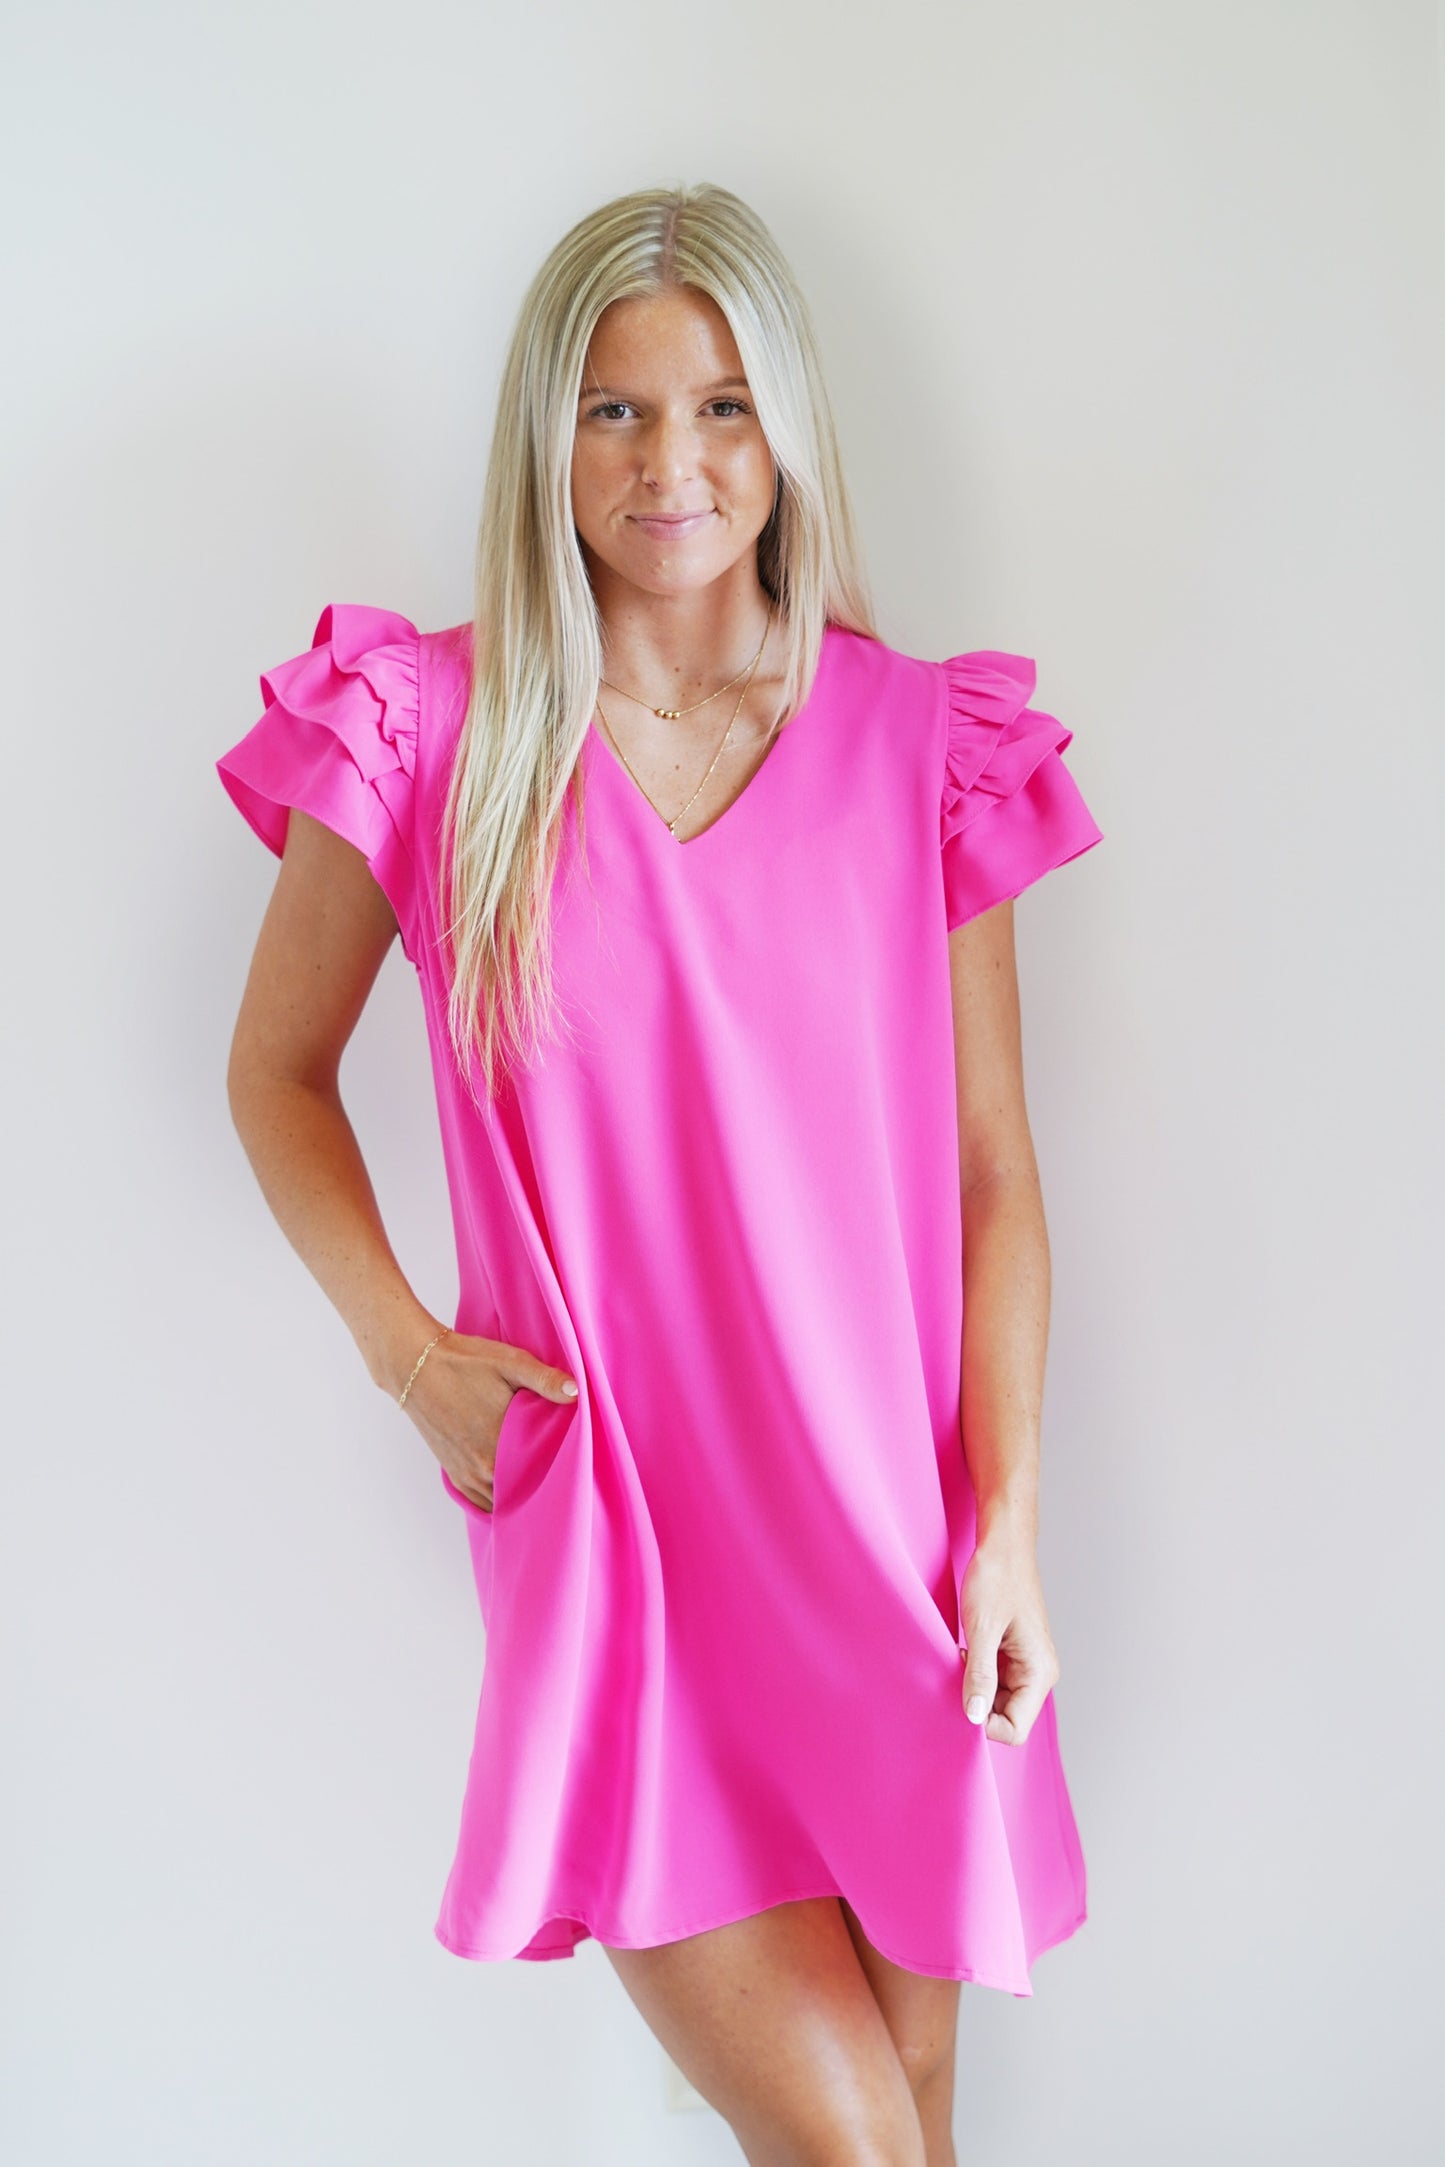 Hannah Hot Pink V-Neck Dress V-Neckline Ruffle Short Sleeve Hot Pink Vibrant Color Knee Length 100% Polyester Hand Wash Cold, Line Dry Model is wearing size:Small